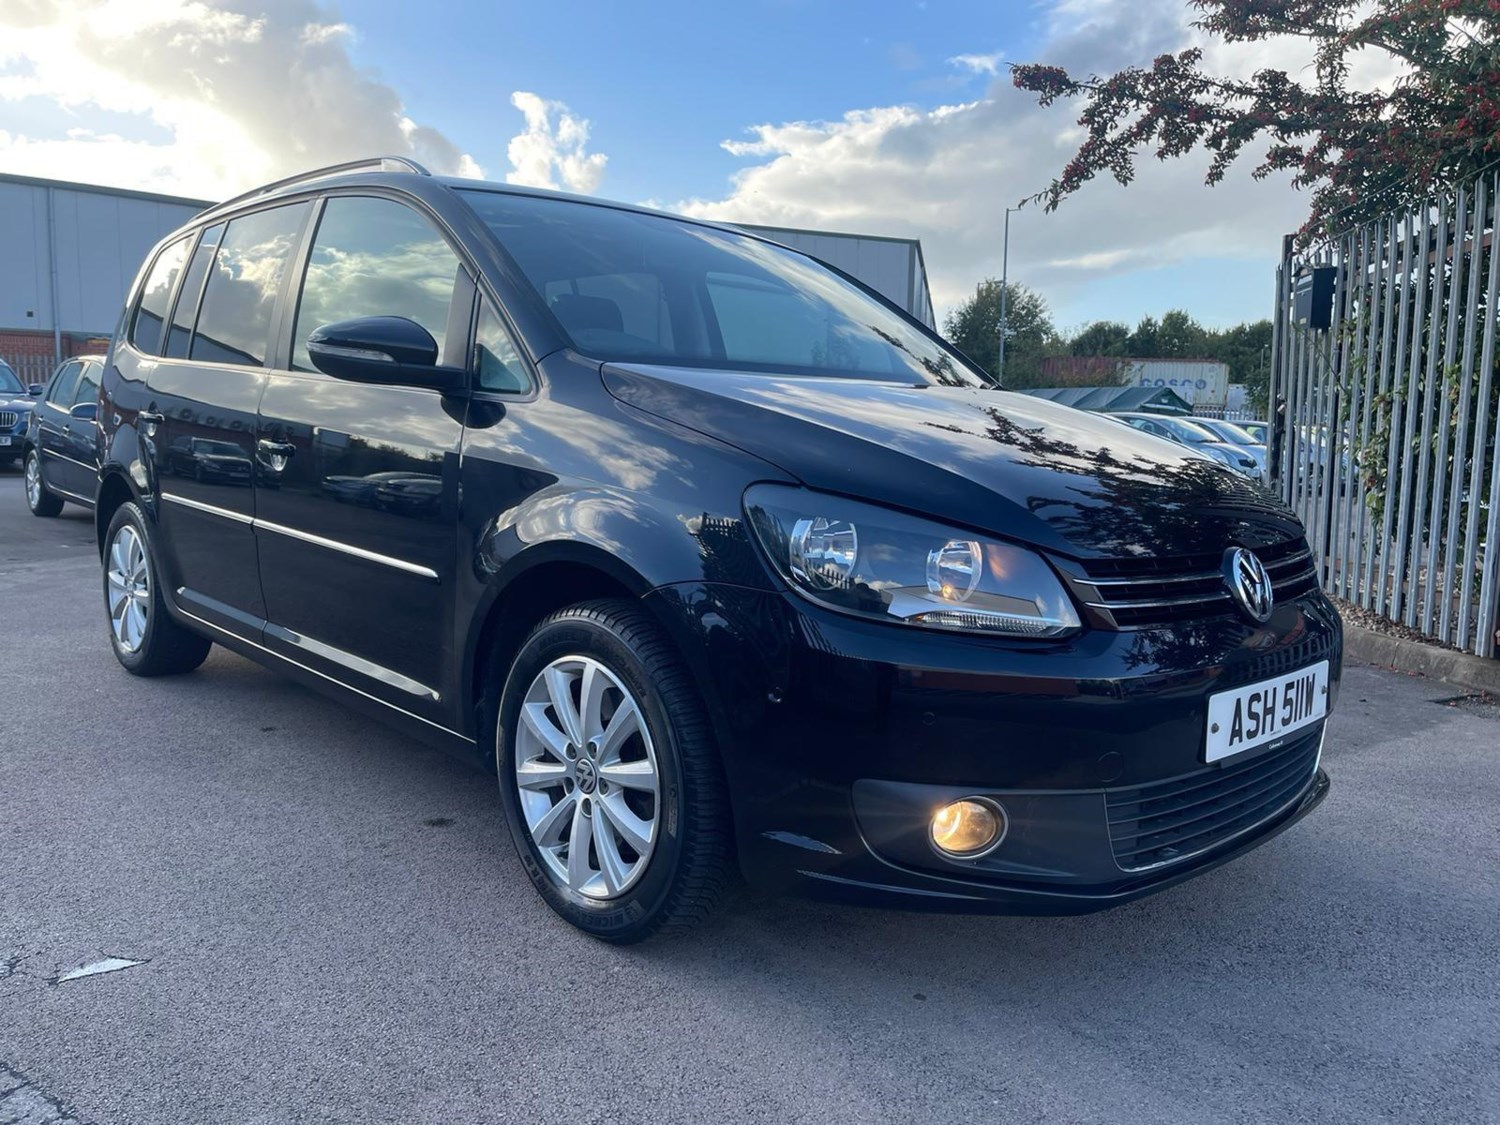 Approved Used Volkswagen Touran for Sale in UK